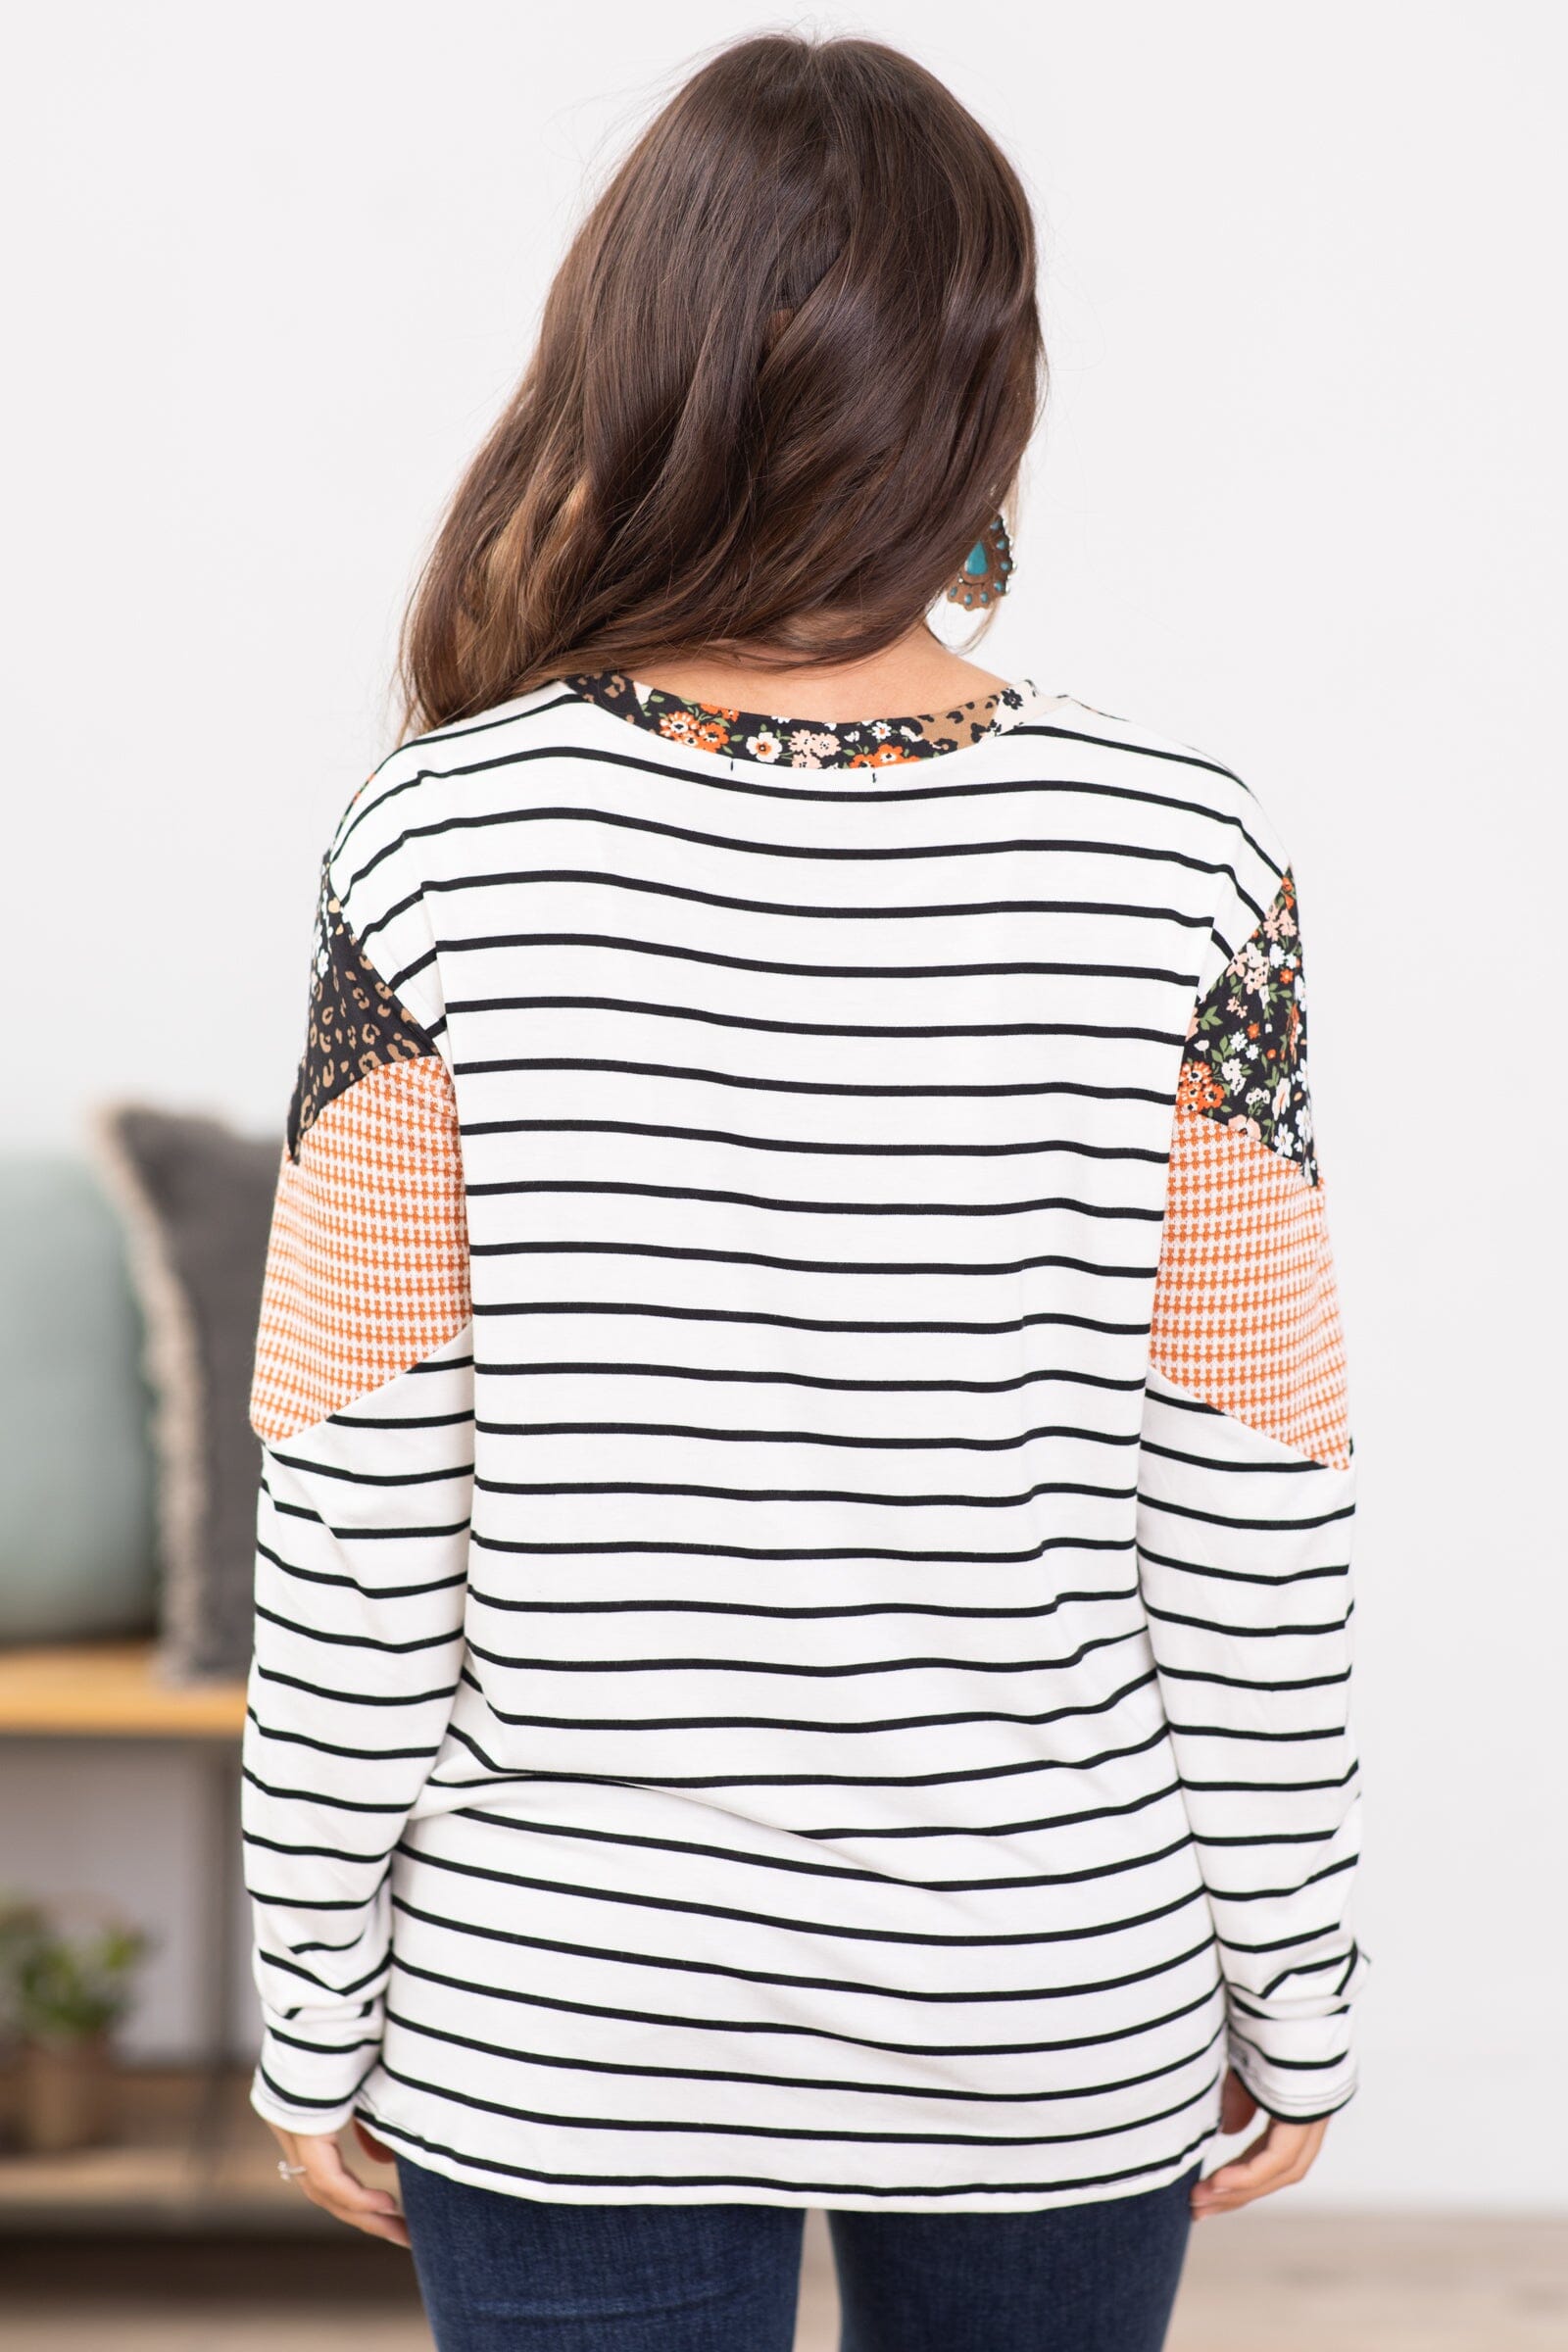 Black and Off White Stripe Colorblock Top - Filly Flair